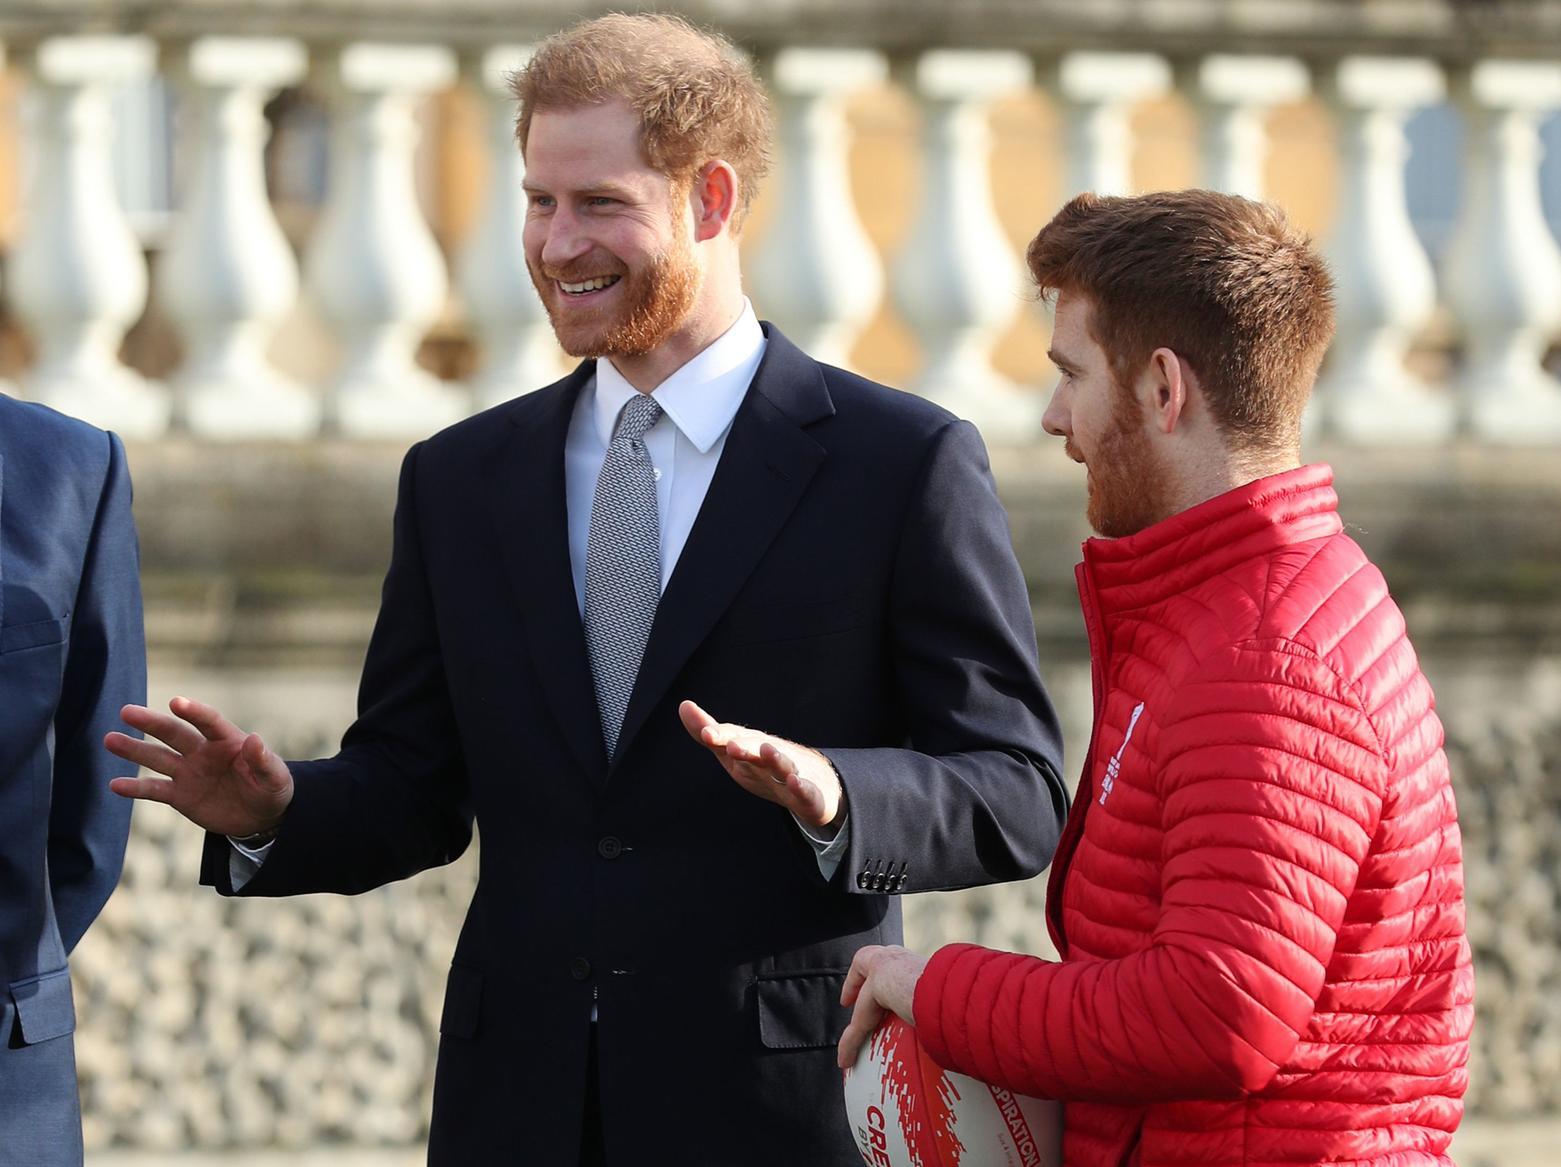 The Duke of Sussex talks with Leeds Rhino player, James Simpson, in the Buckingham Palace gardens, London, as he hosts the Rugby League World Cup 2021 draws